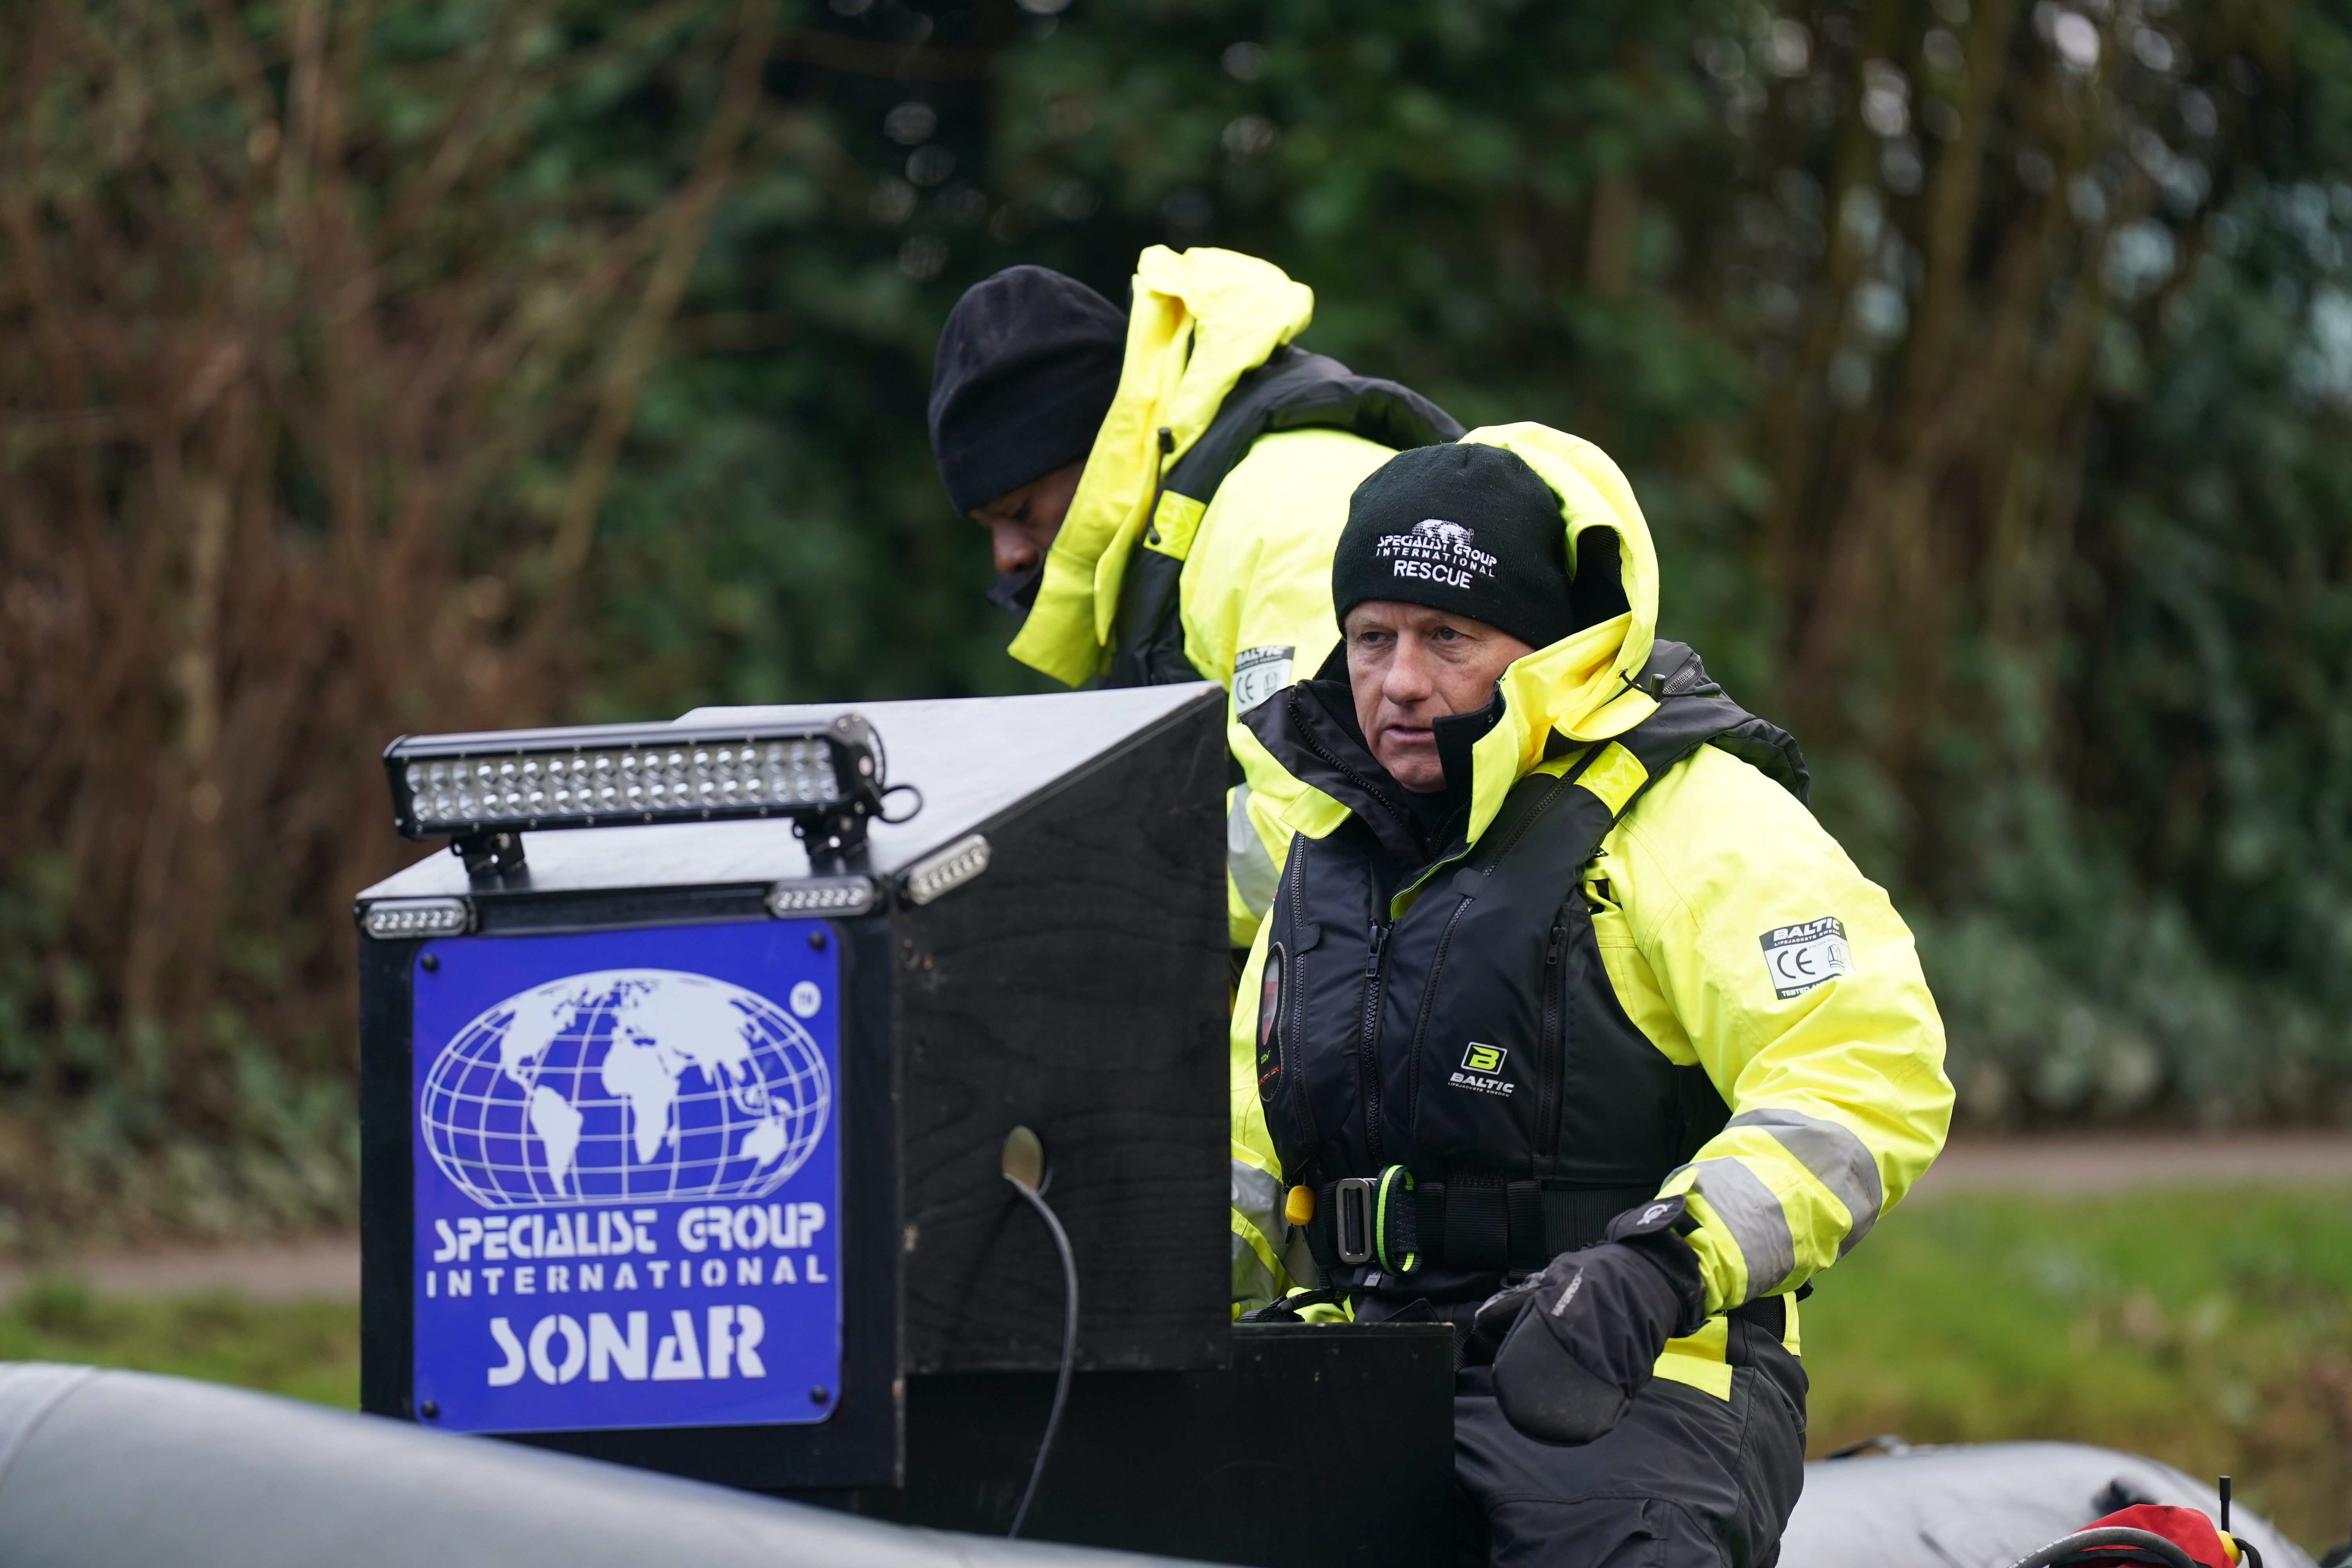 Peter Faulding (right), CEO of private underwater search and recovery company Specialist Group International (SGI), joins the search operation for two-year-old Xielo Maruziva at the river Soar